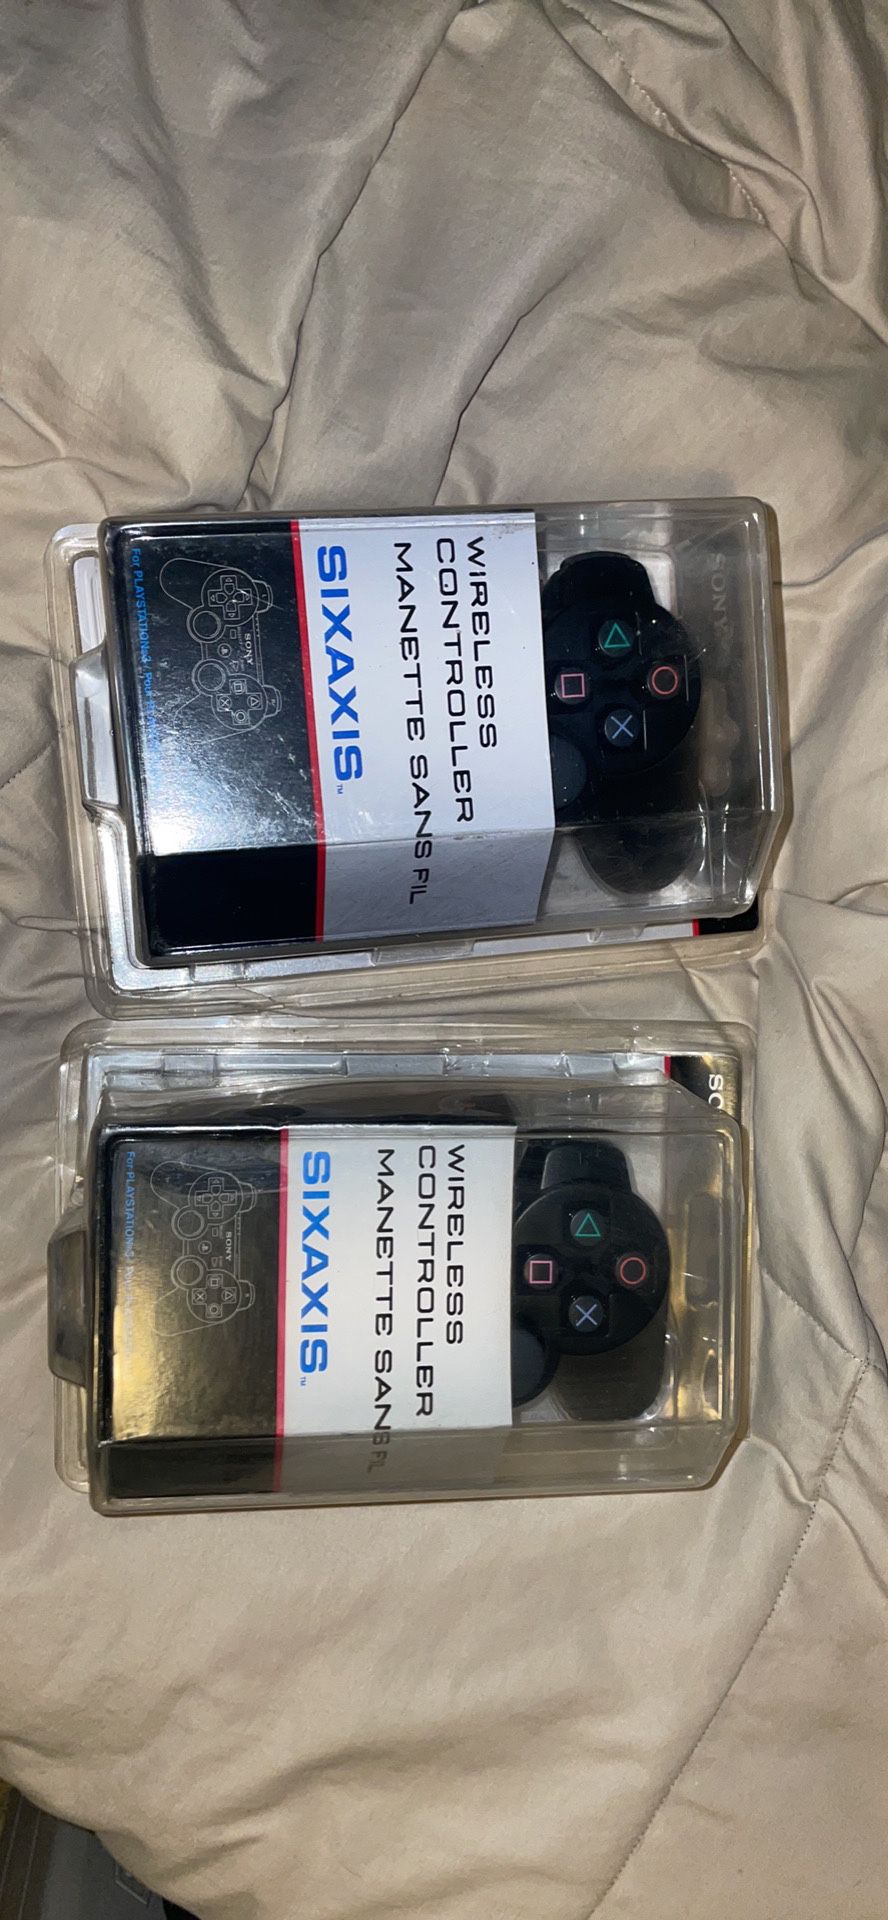 Ps3 Sixaxis controllers 